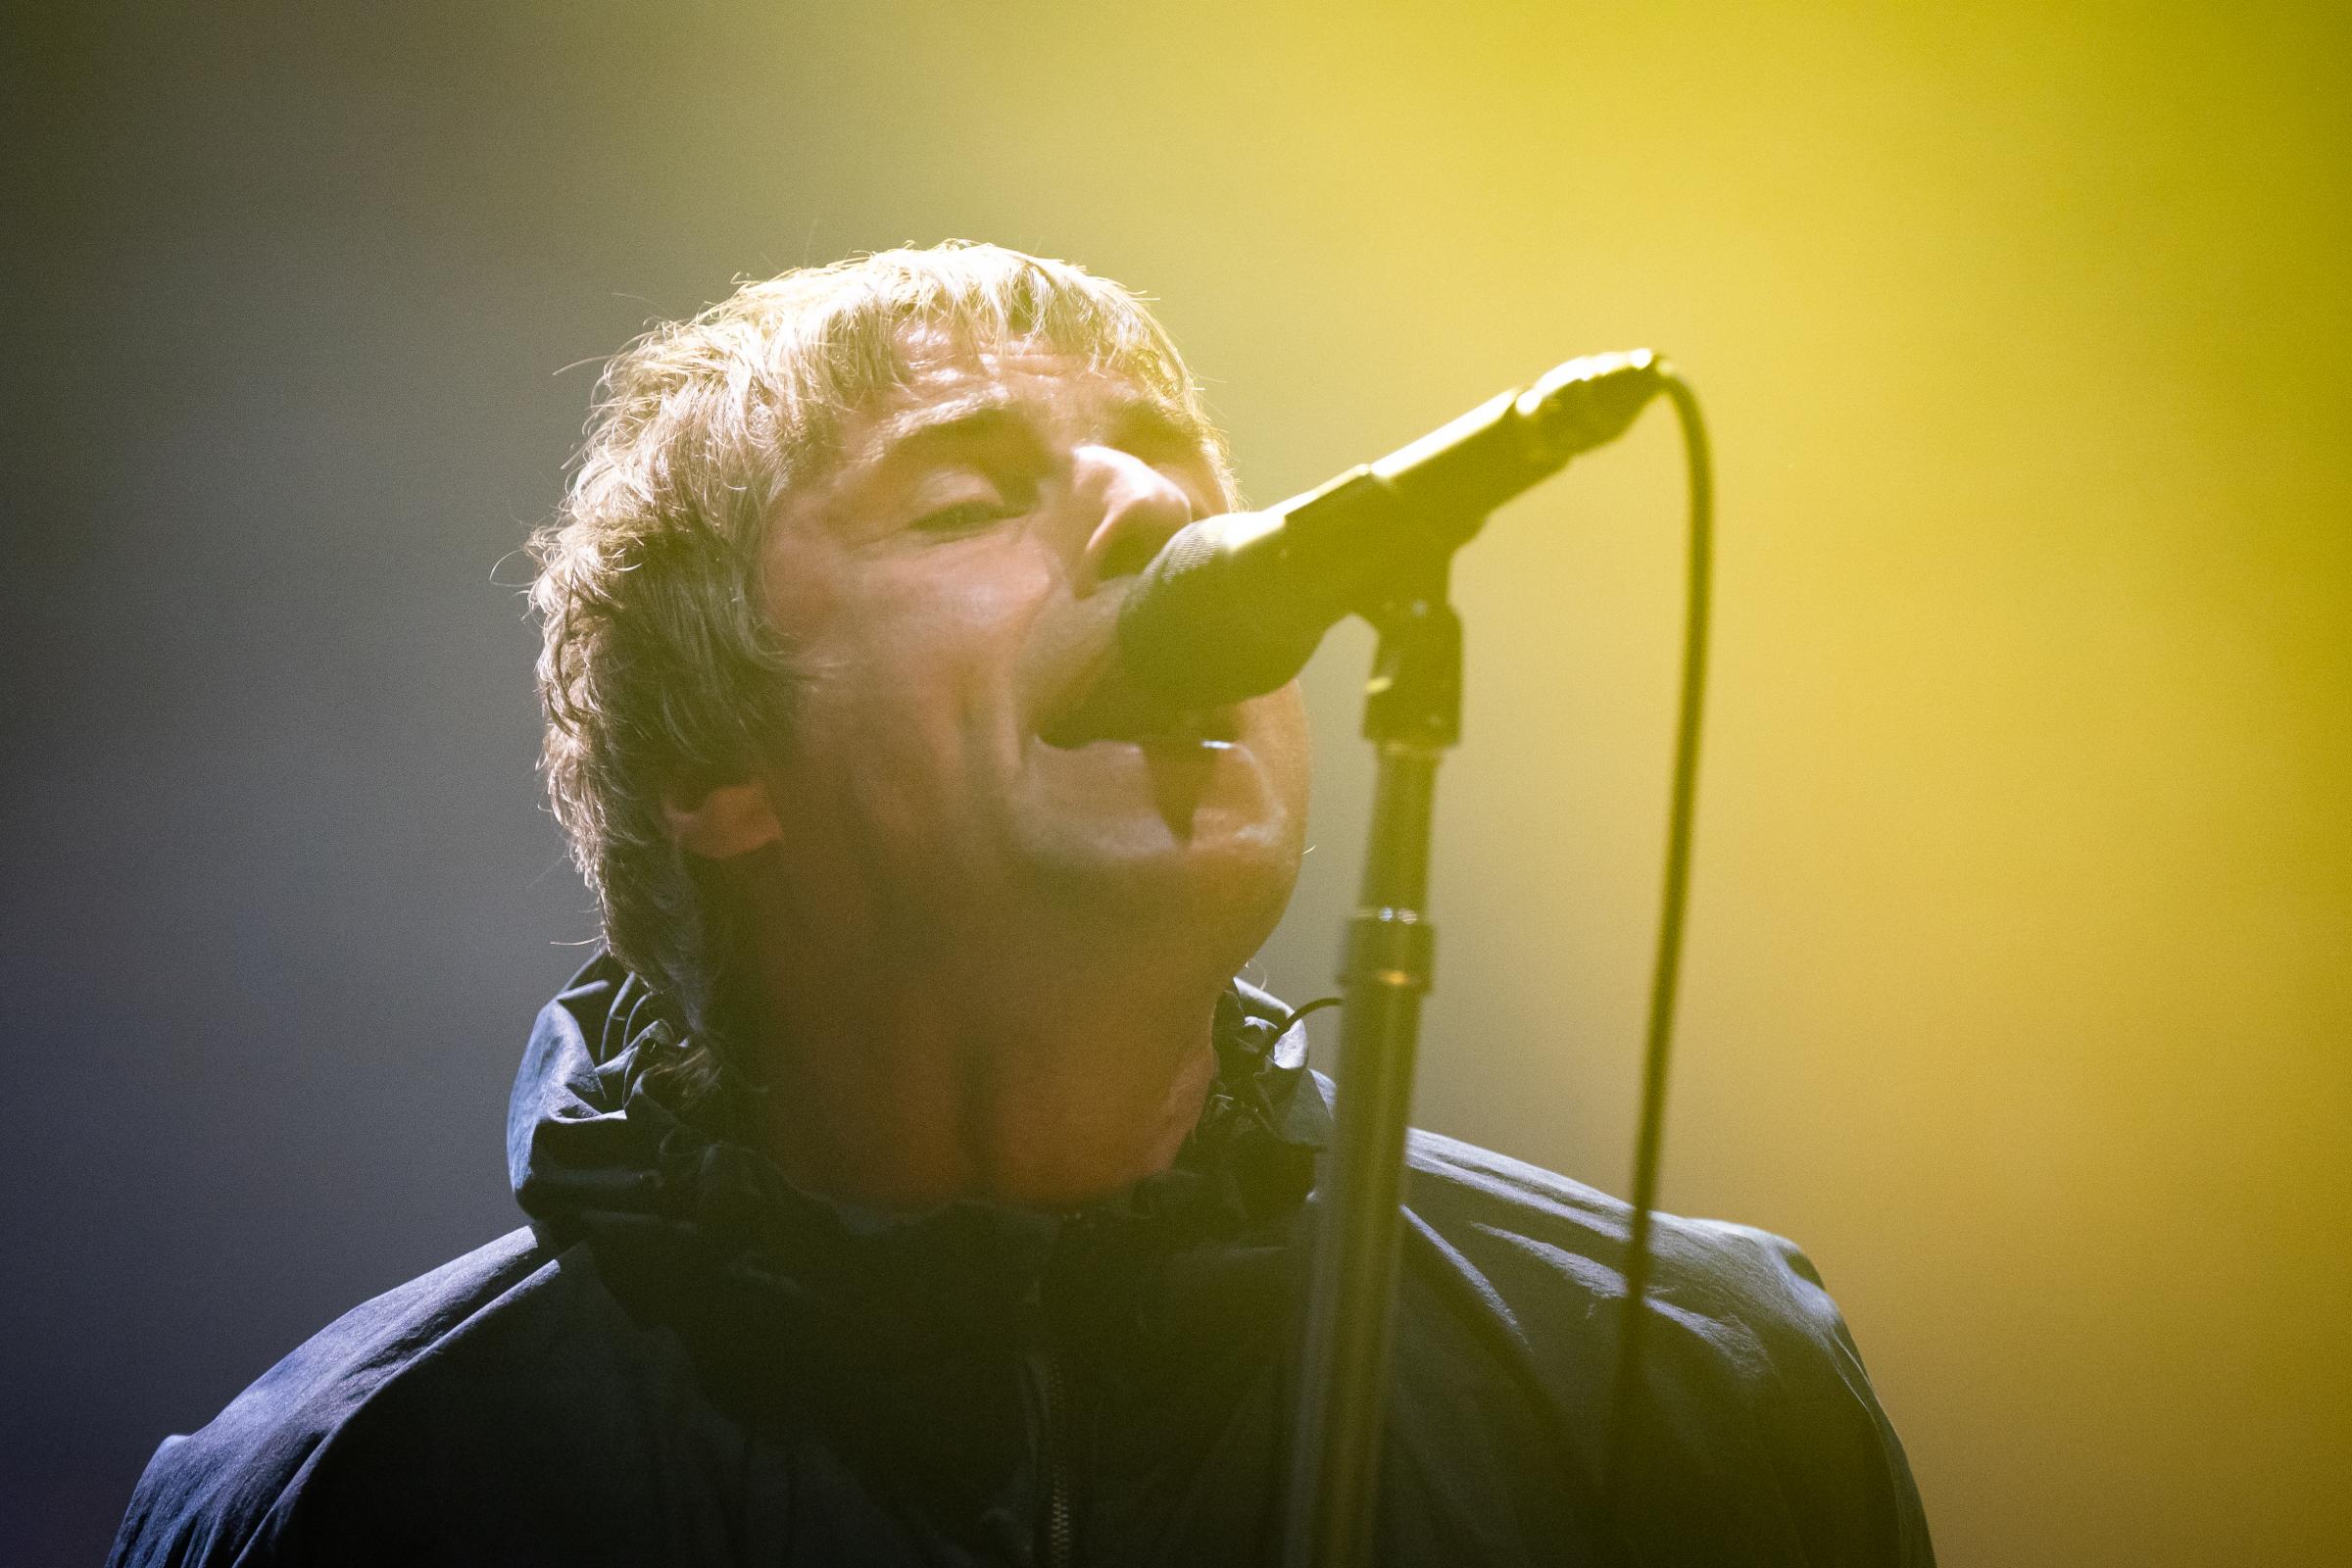 Liam Gallagher at the Teenage Cancer Trust Concert, at the Royal Albert Hall, London on March 26. Photo: PA